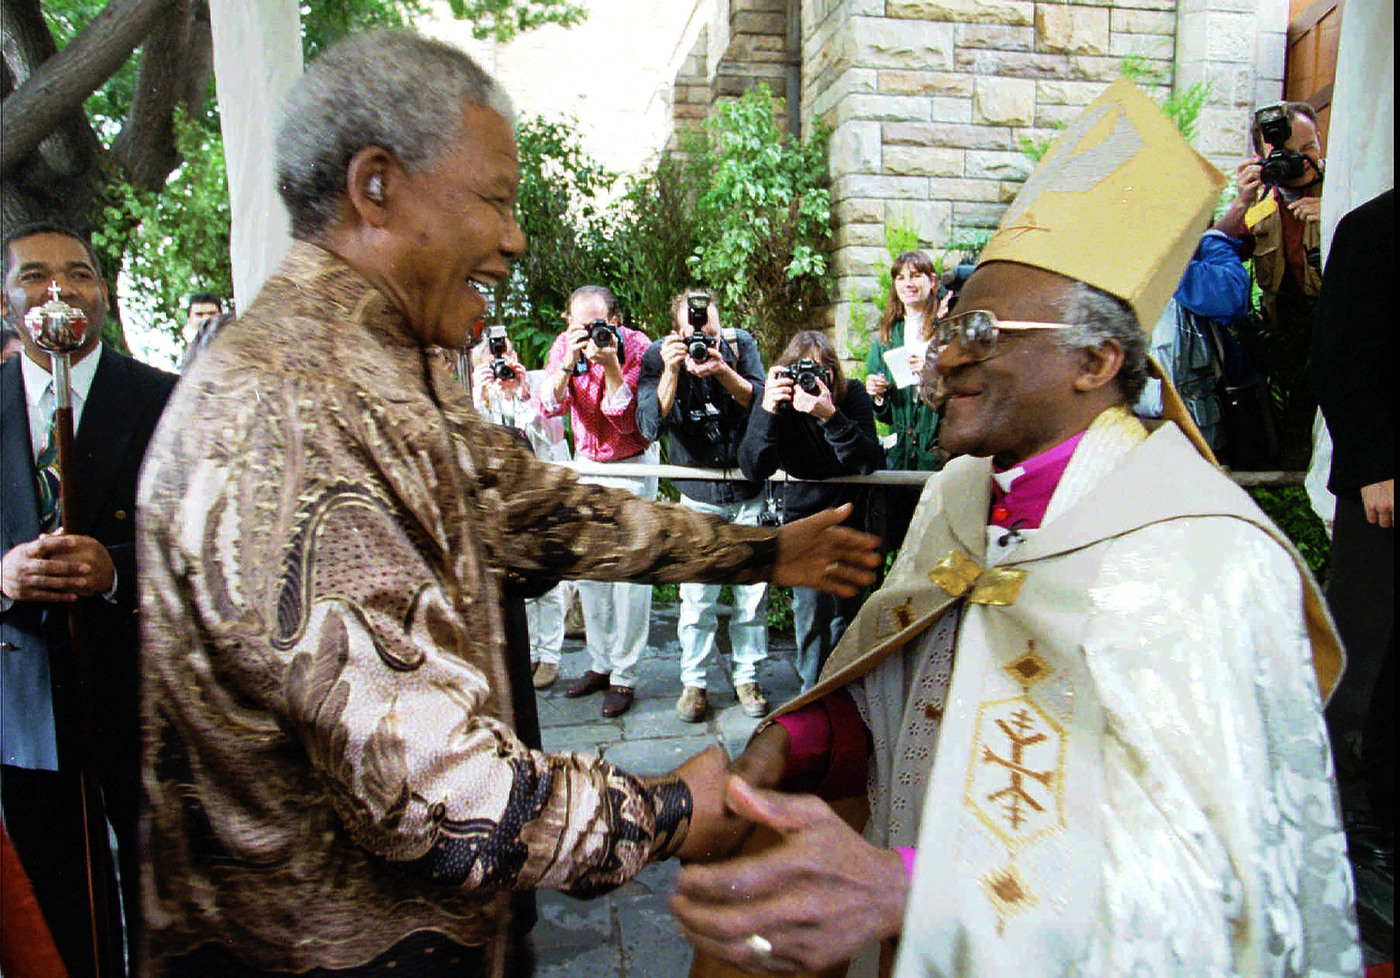 FILE - Retiring Archbishop of Cape Town Desmond Tutu, right, greets President Nelson Mandela at a service in Cape Town, Sunday June 23, 1996 held to celebrate the end of Tutu's tenure as leader of the Anglican Church in South Africa. Tutu, South Africa’s Nobel Peace Prize-winning activist for racial justice and LGBT rights and retired Anglican Archbishop of Cape Town, has died, South African President Cyril Ramaphosa announced Sunday Dec. 26, 2021. He was 90. (AP Photo/Guy Tillim, File)